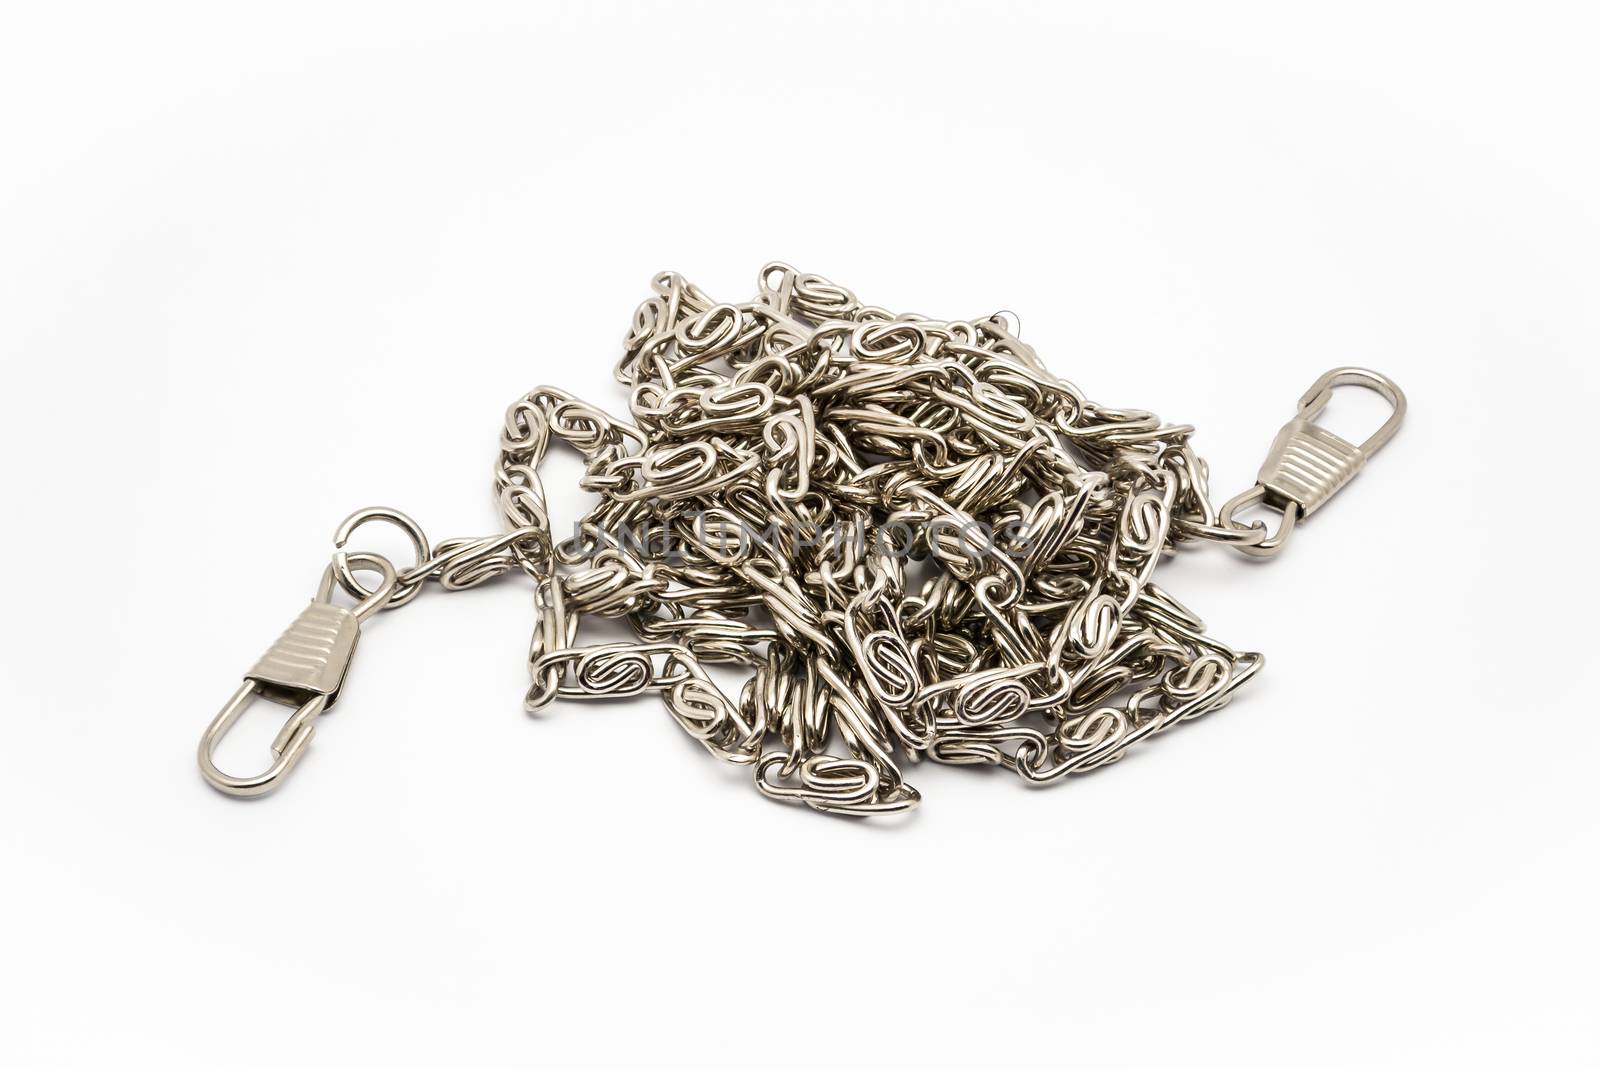 Stainless Steel Necklace with Hooks.